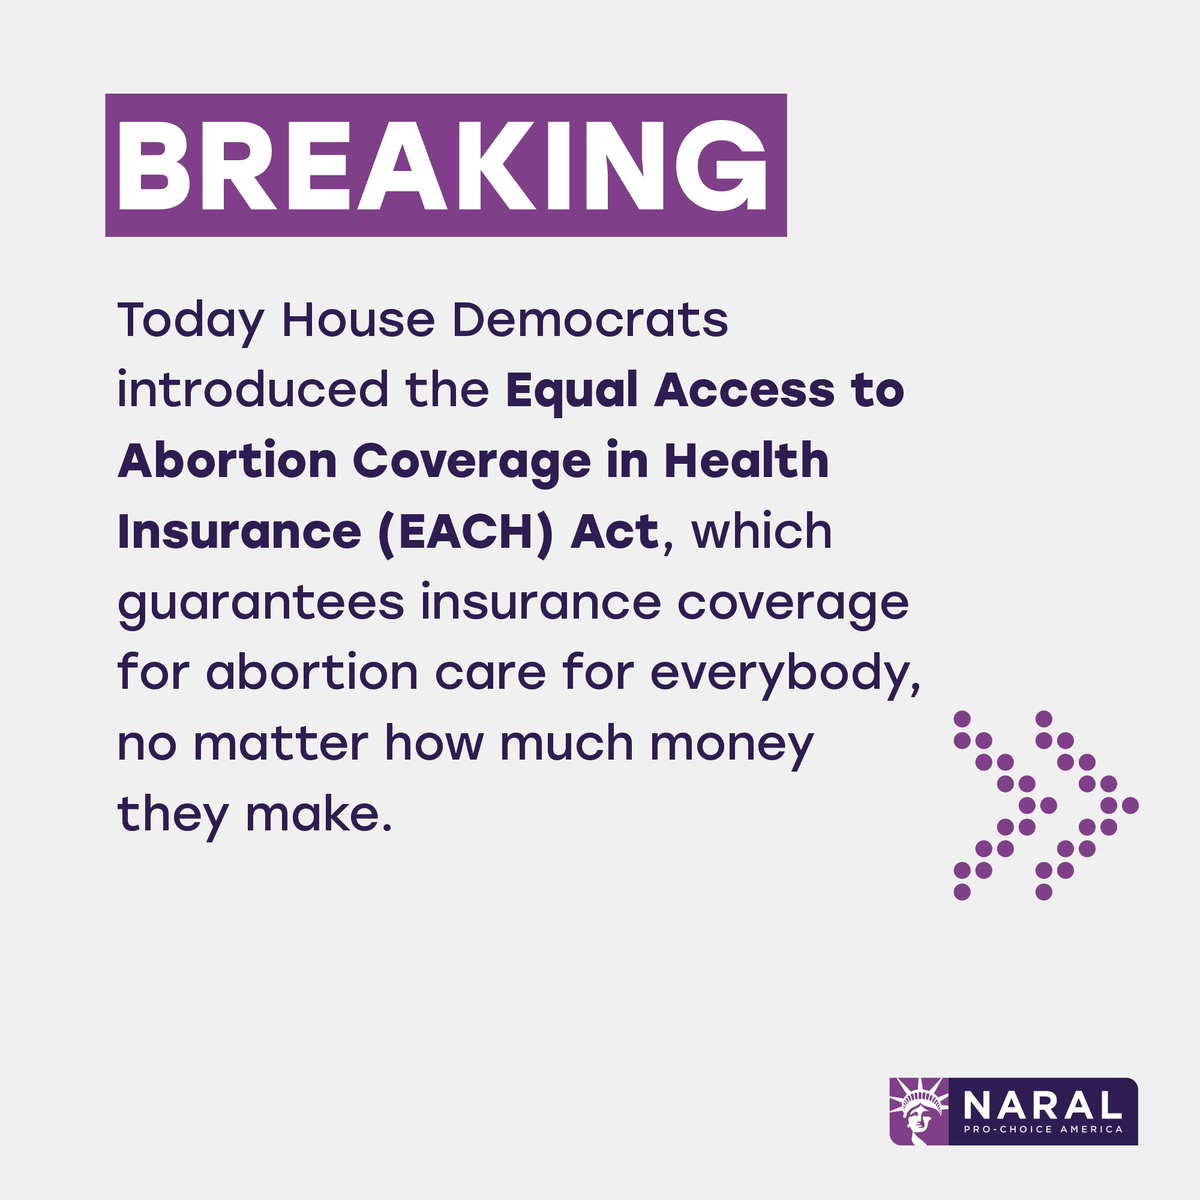 BREAKING: Today House Democrats introduced the Equal Access to Abortion Coverage in Health Insurance (EACH) Act, which guarantees insurance coverage for abortion care for everybody, no matter how much money they make. #4EACHofUs